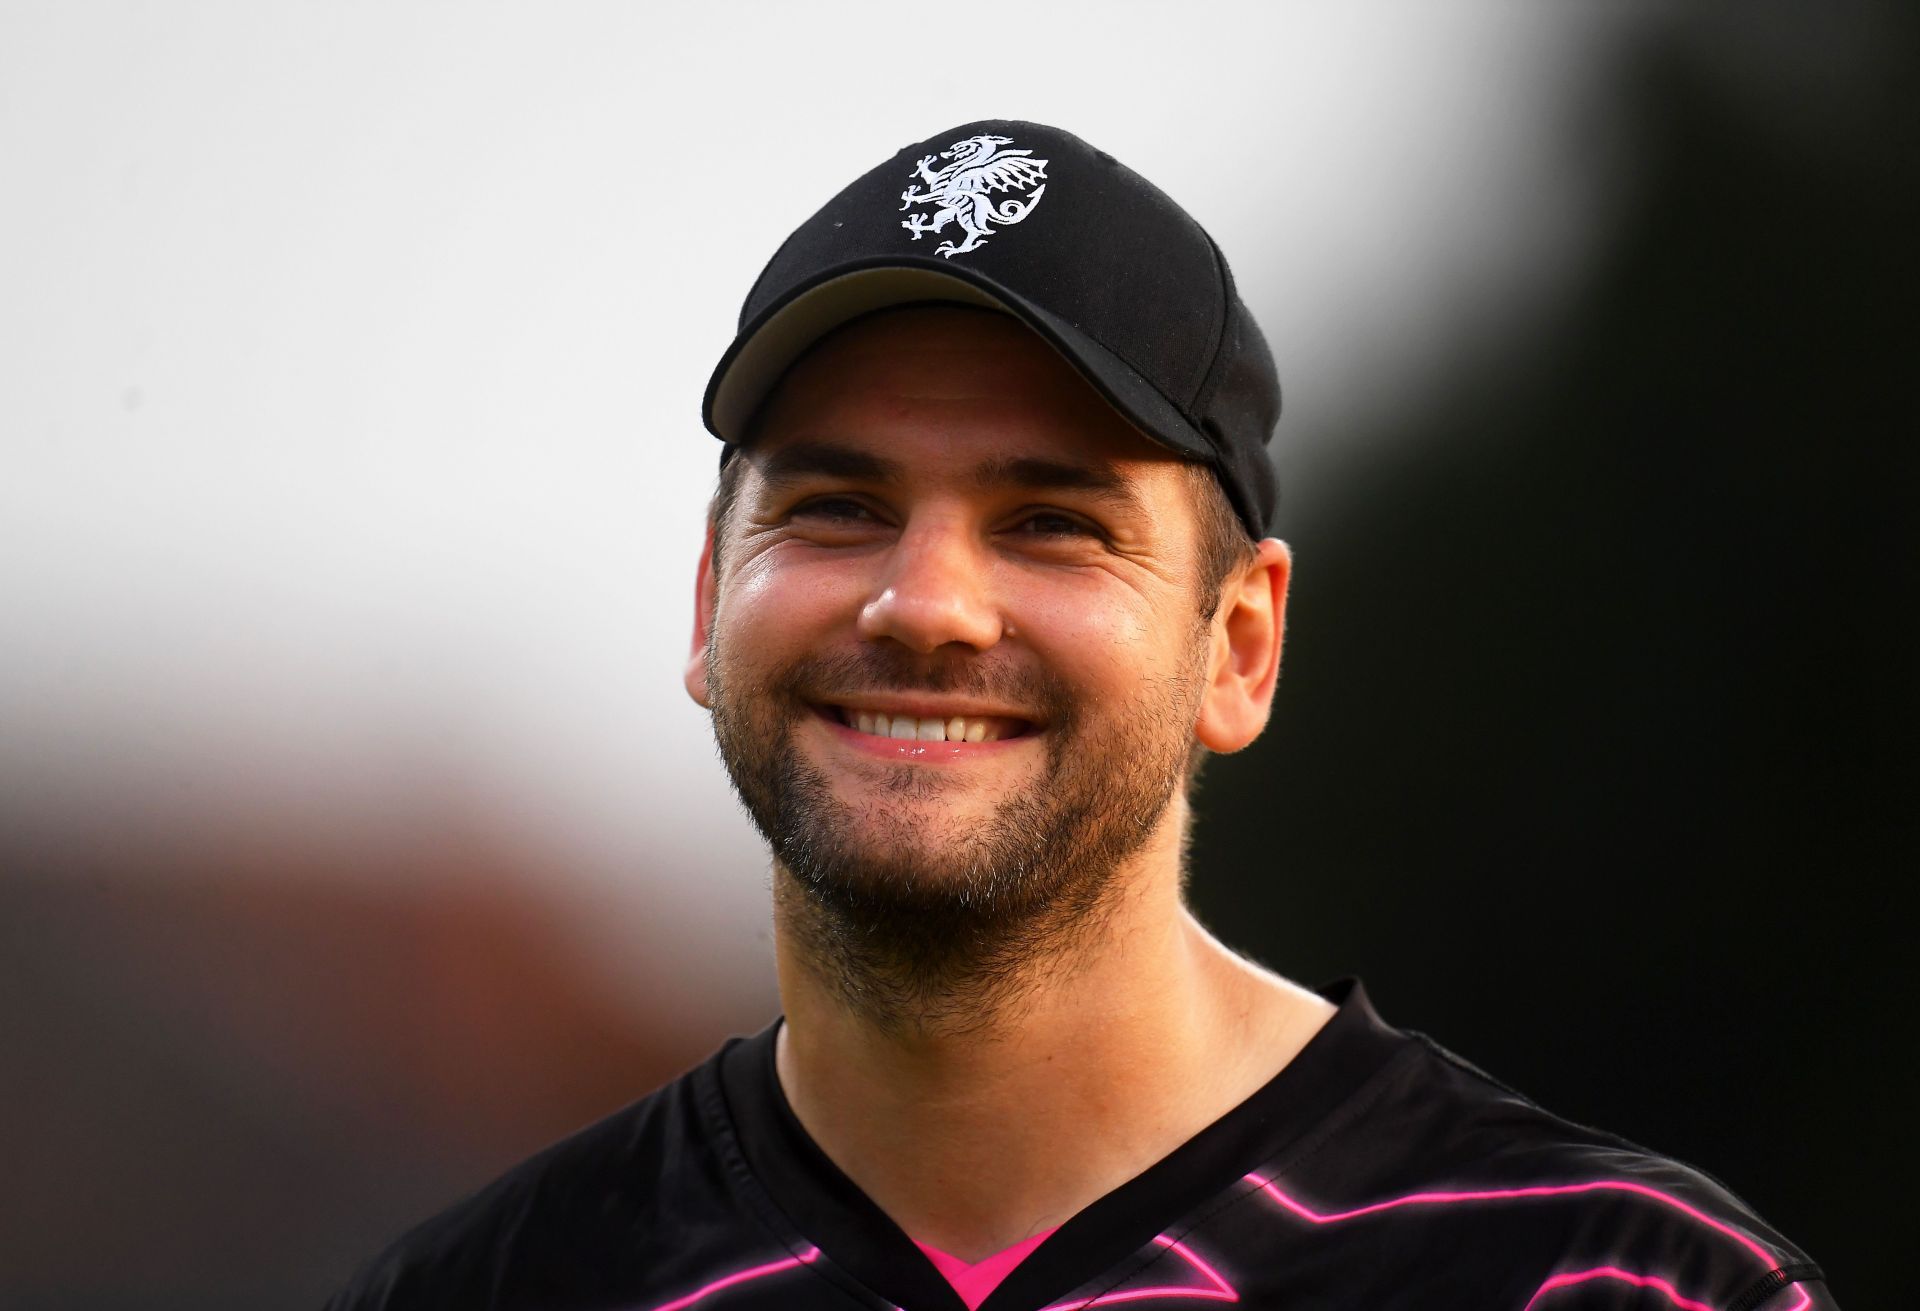 Rilee Rossouw is currently playing for the Delhi Capitals (Image: Getty)